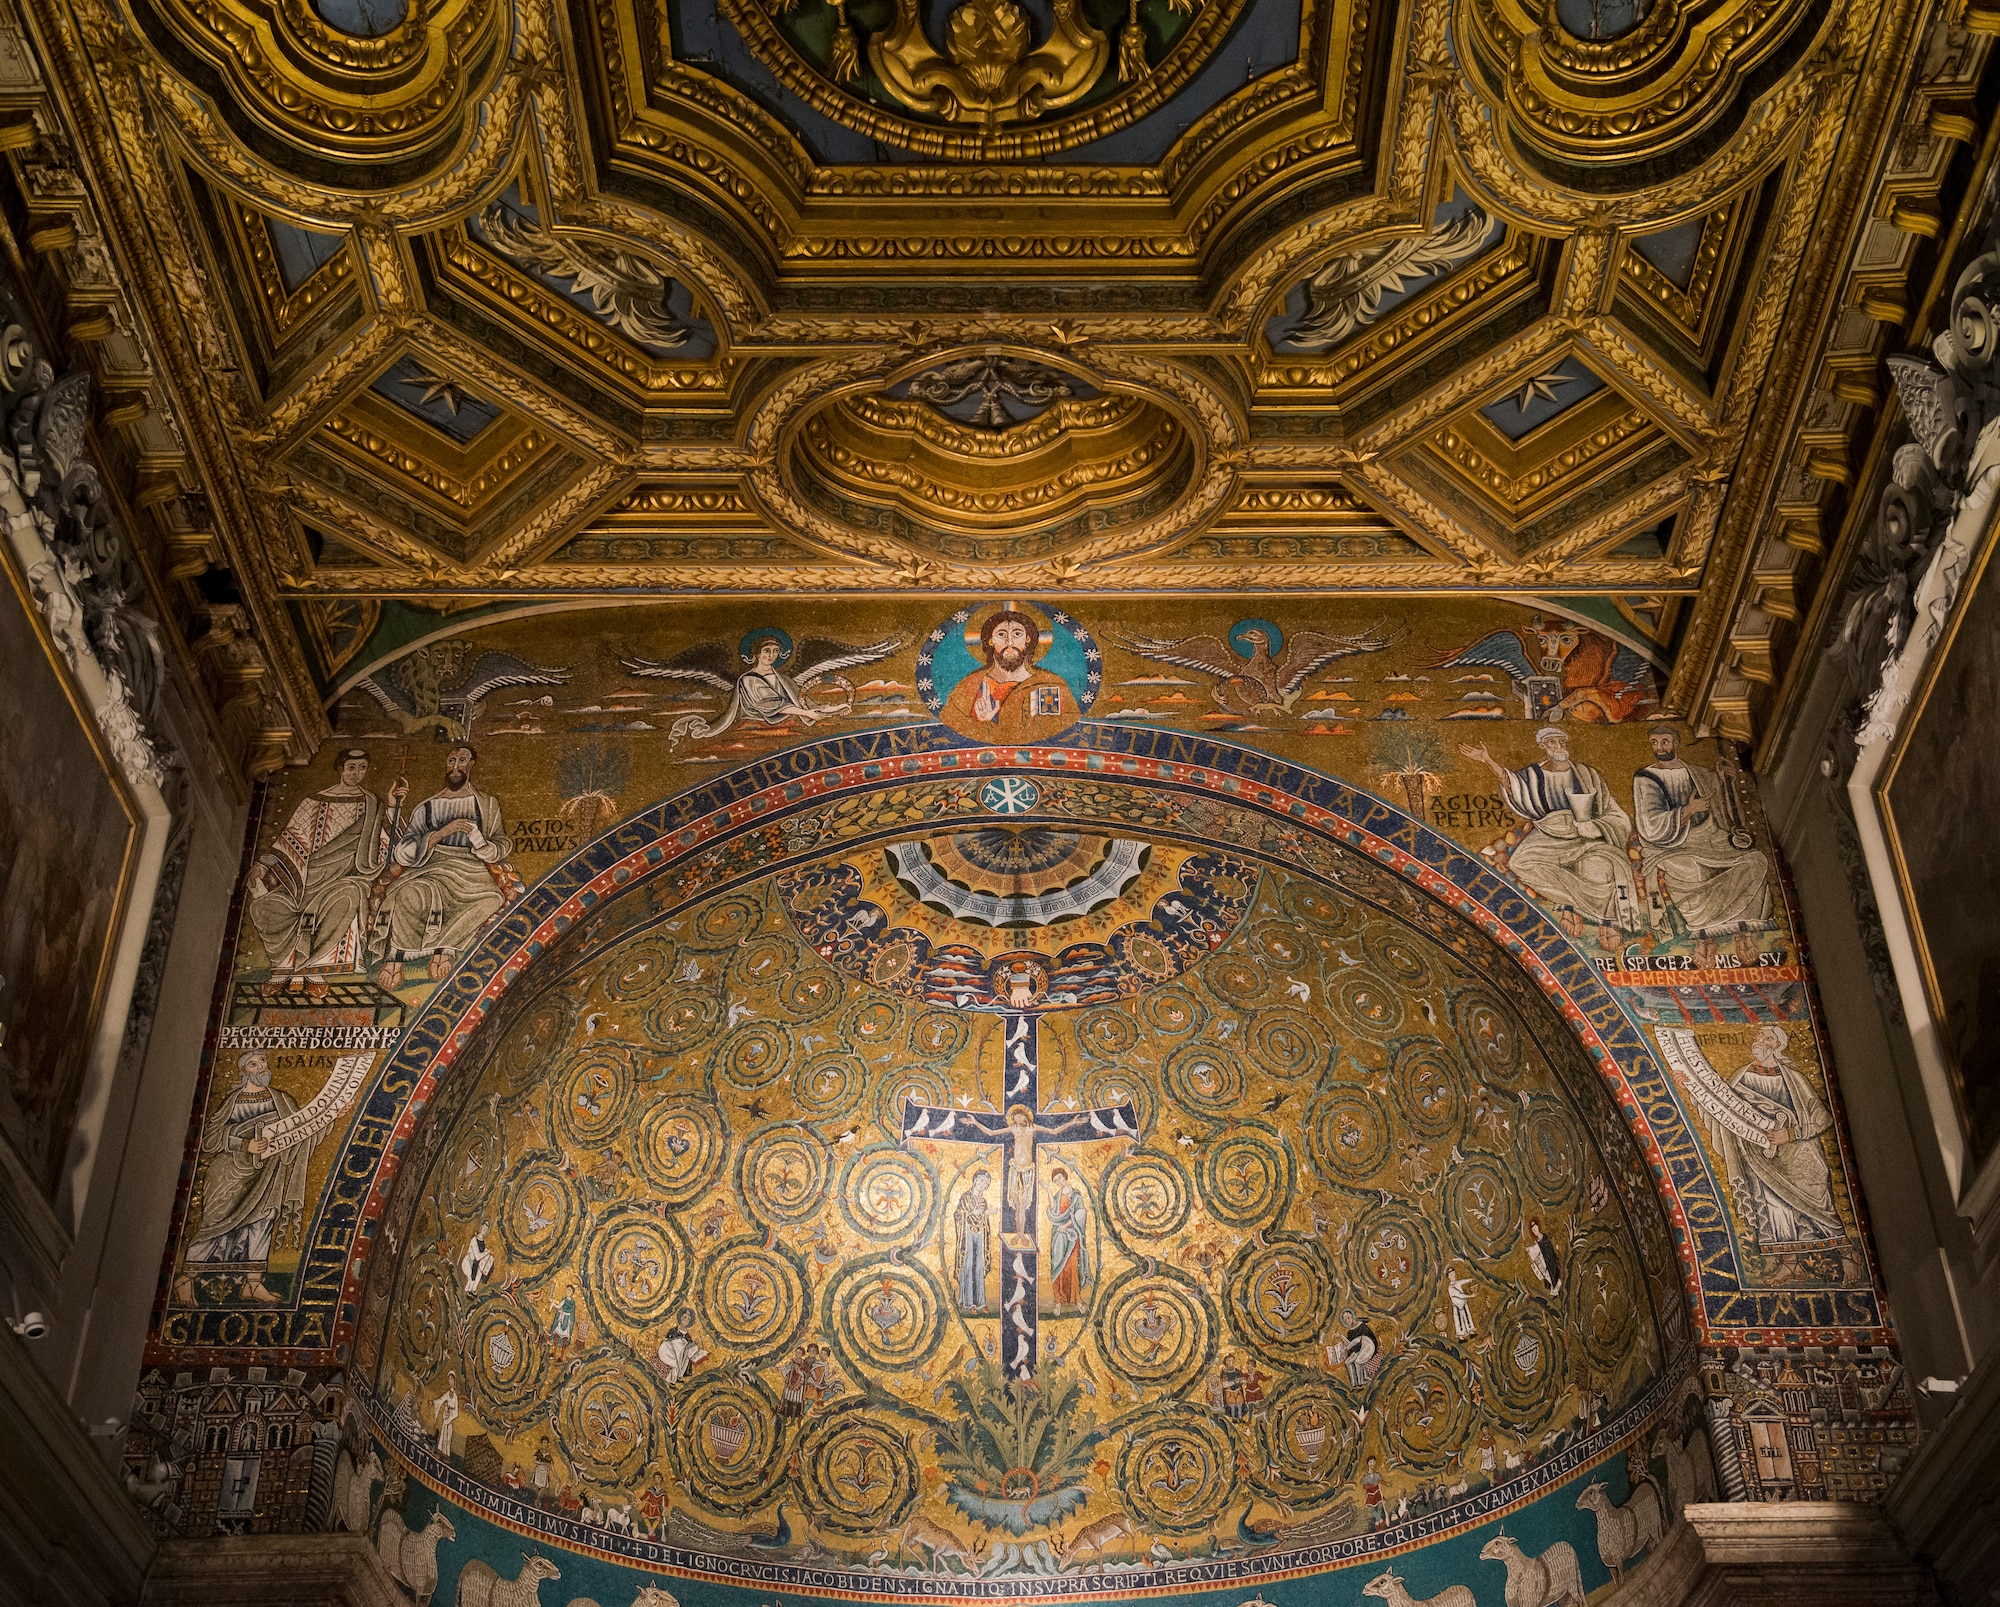 The mosaic apse of the Basilica of San Clemente in Rome was built in the 12th century, along with the present structure. The basilica has three levels of history. Beneath the present basilica is a fourth-century basilica. In the basement is a structure built in the first century. (U.S. Air Force photo/Staff Sgt. Andrew Lee)